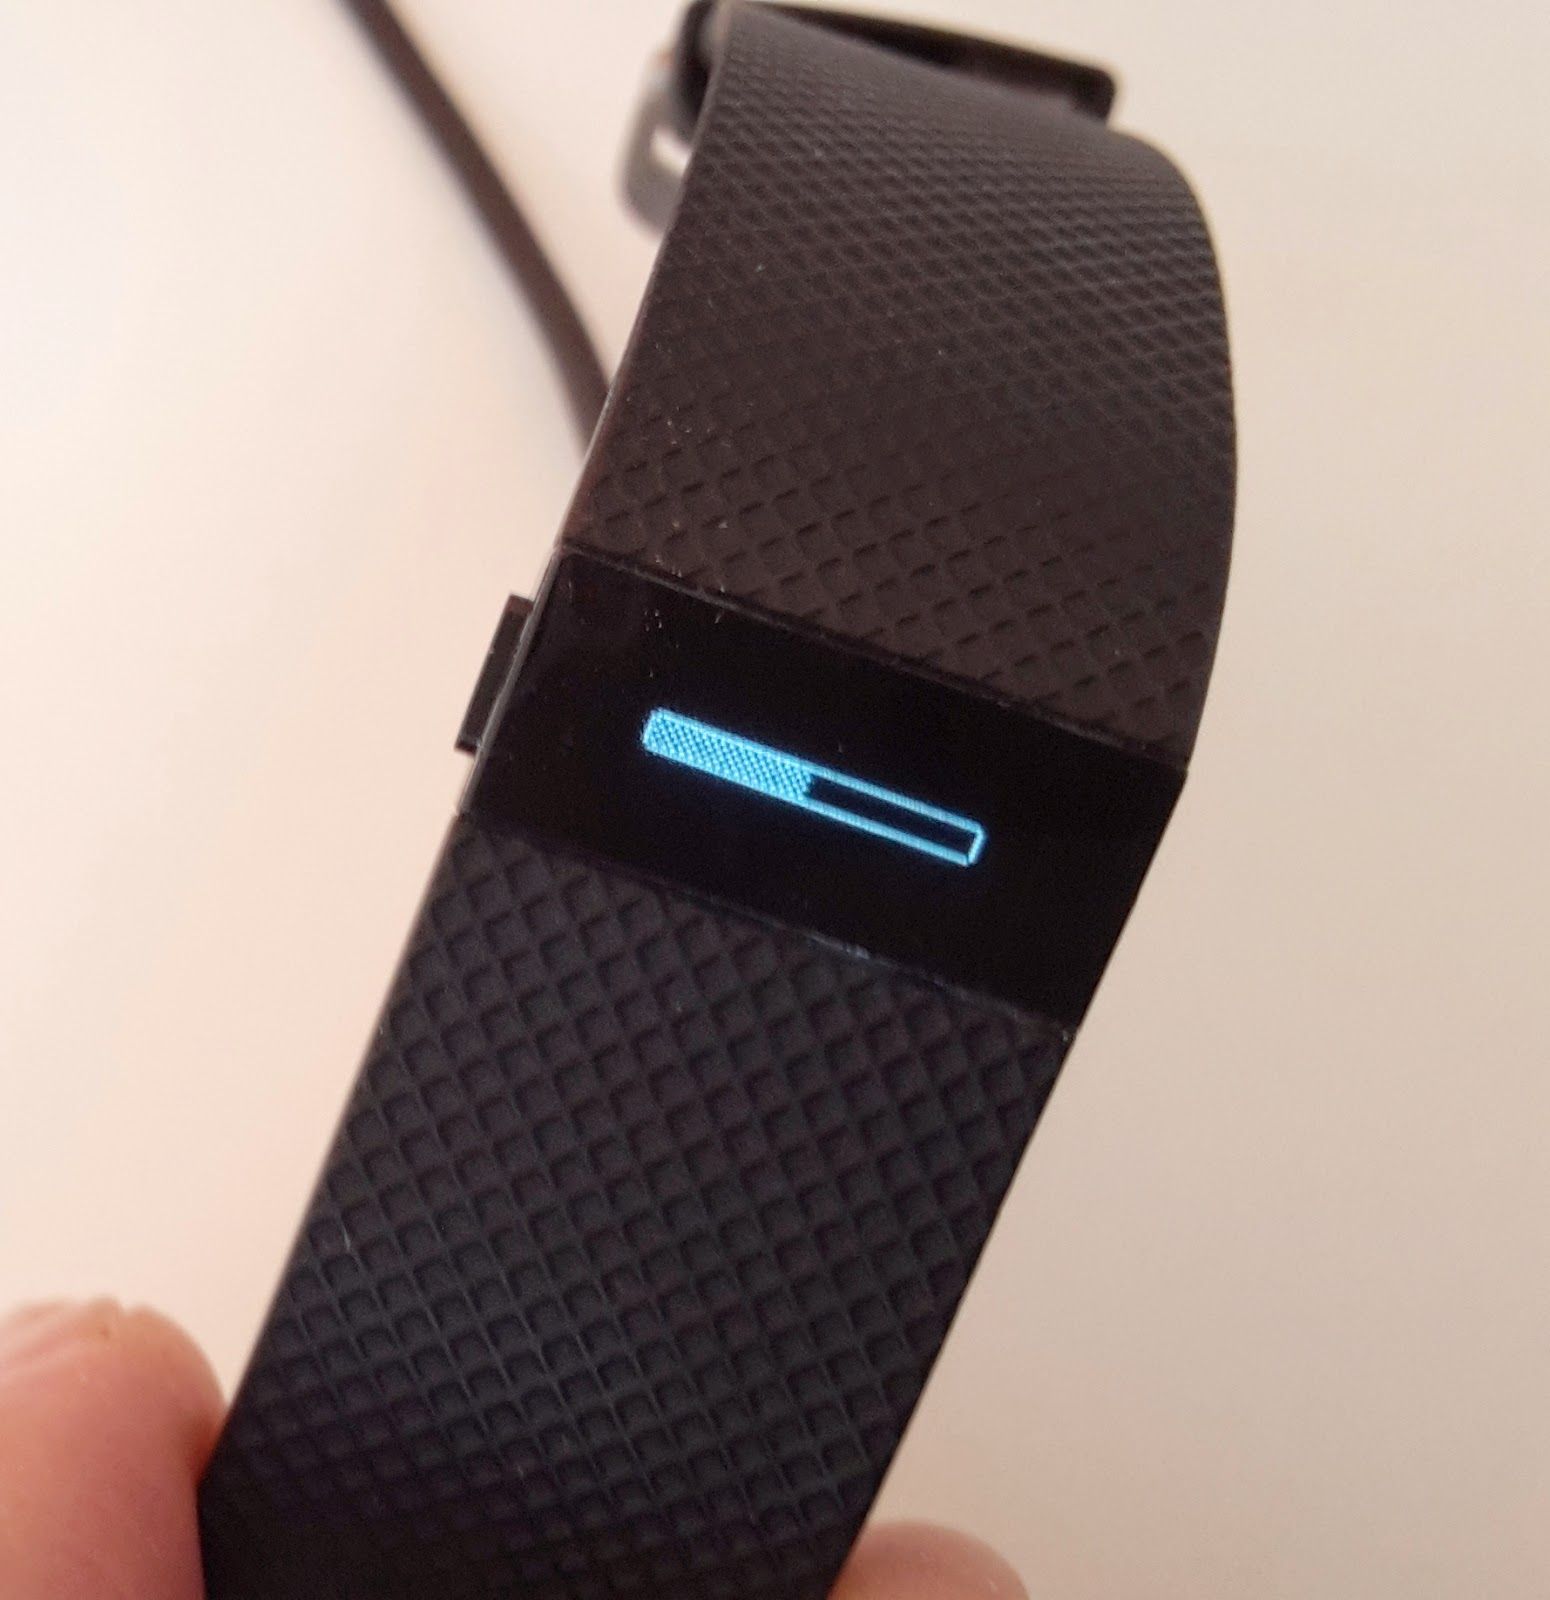 factory reset fitbit charge hr